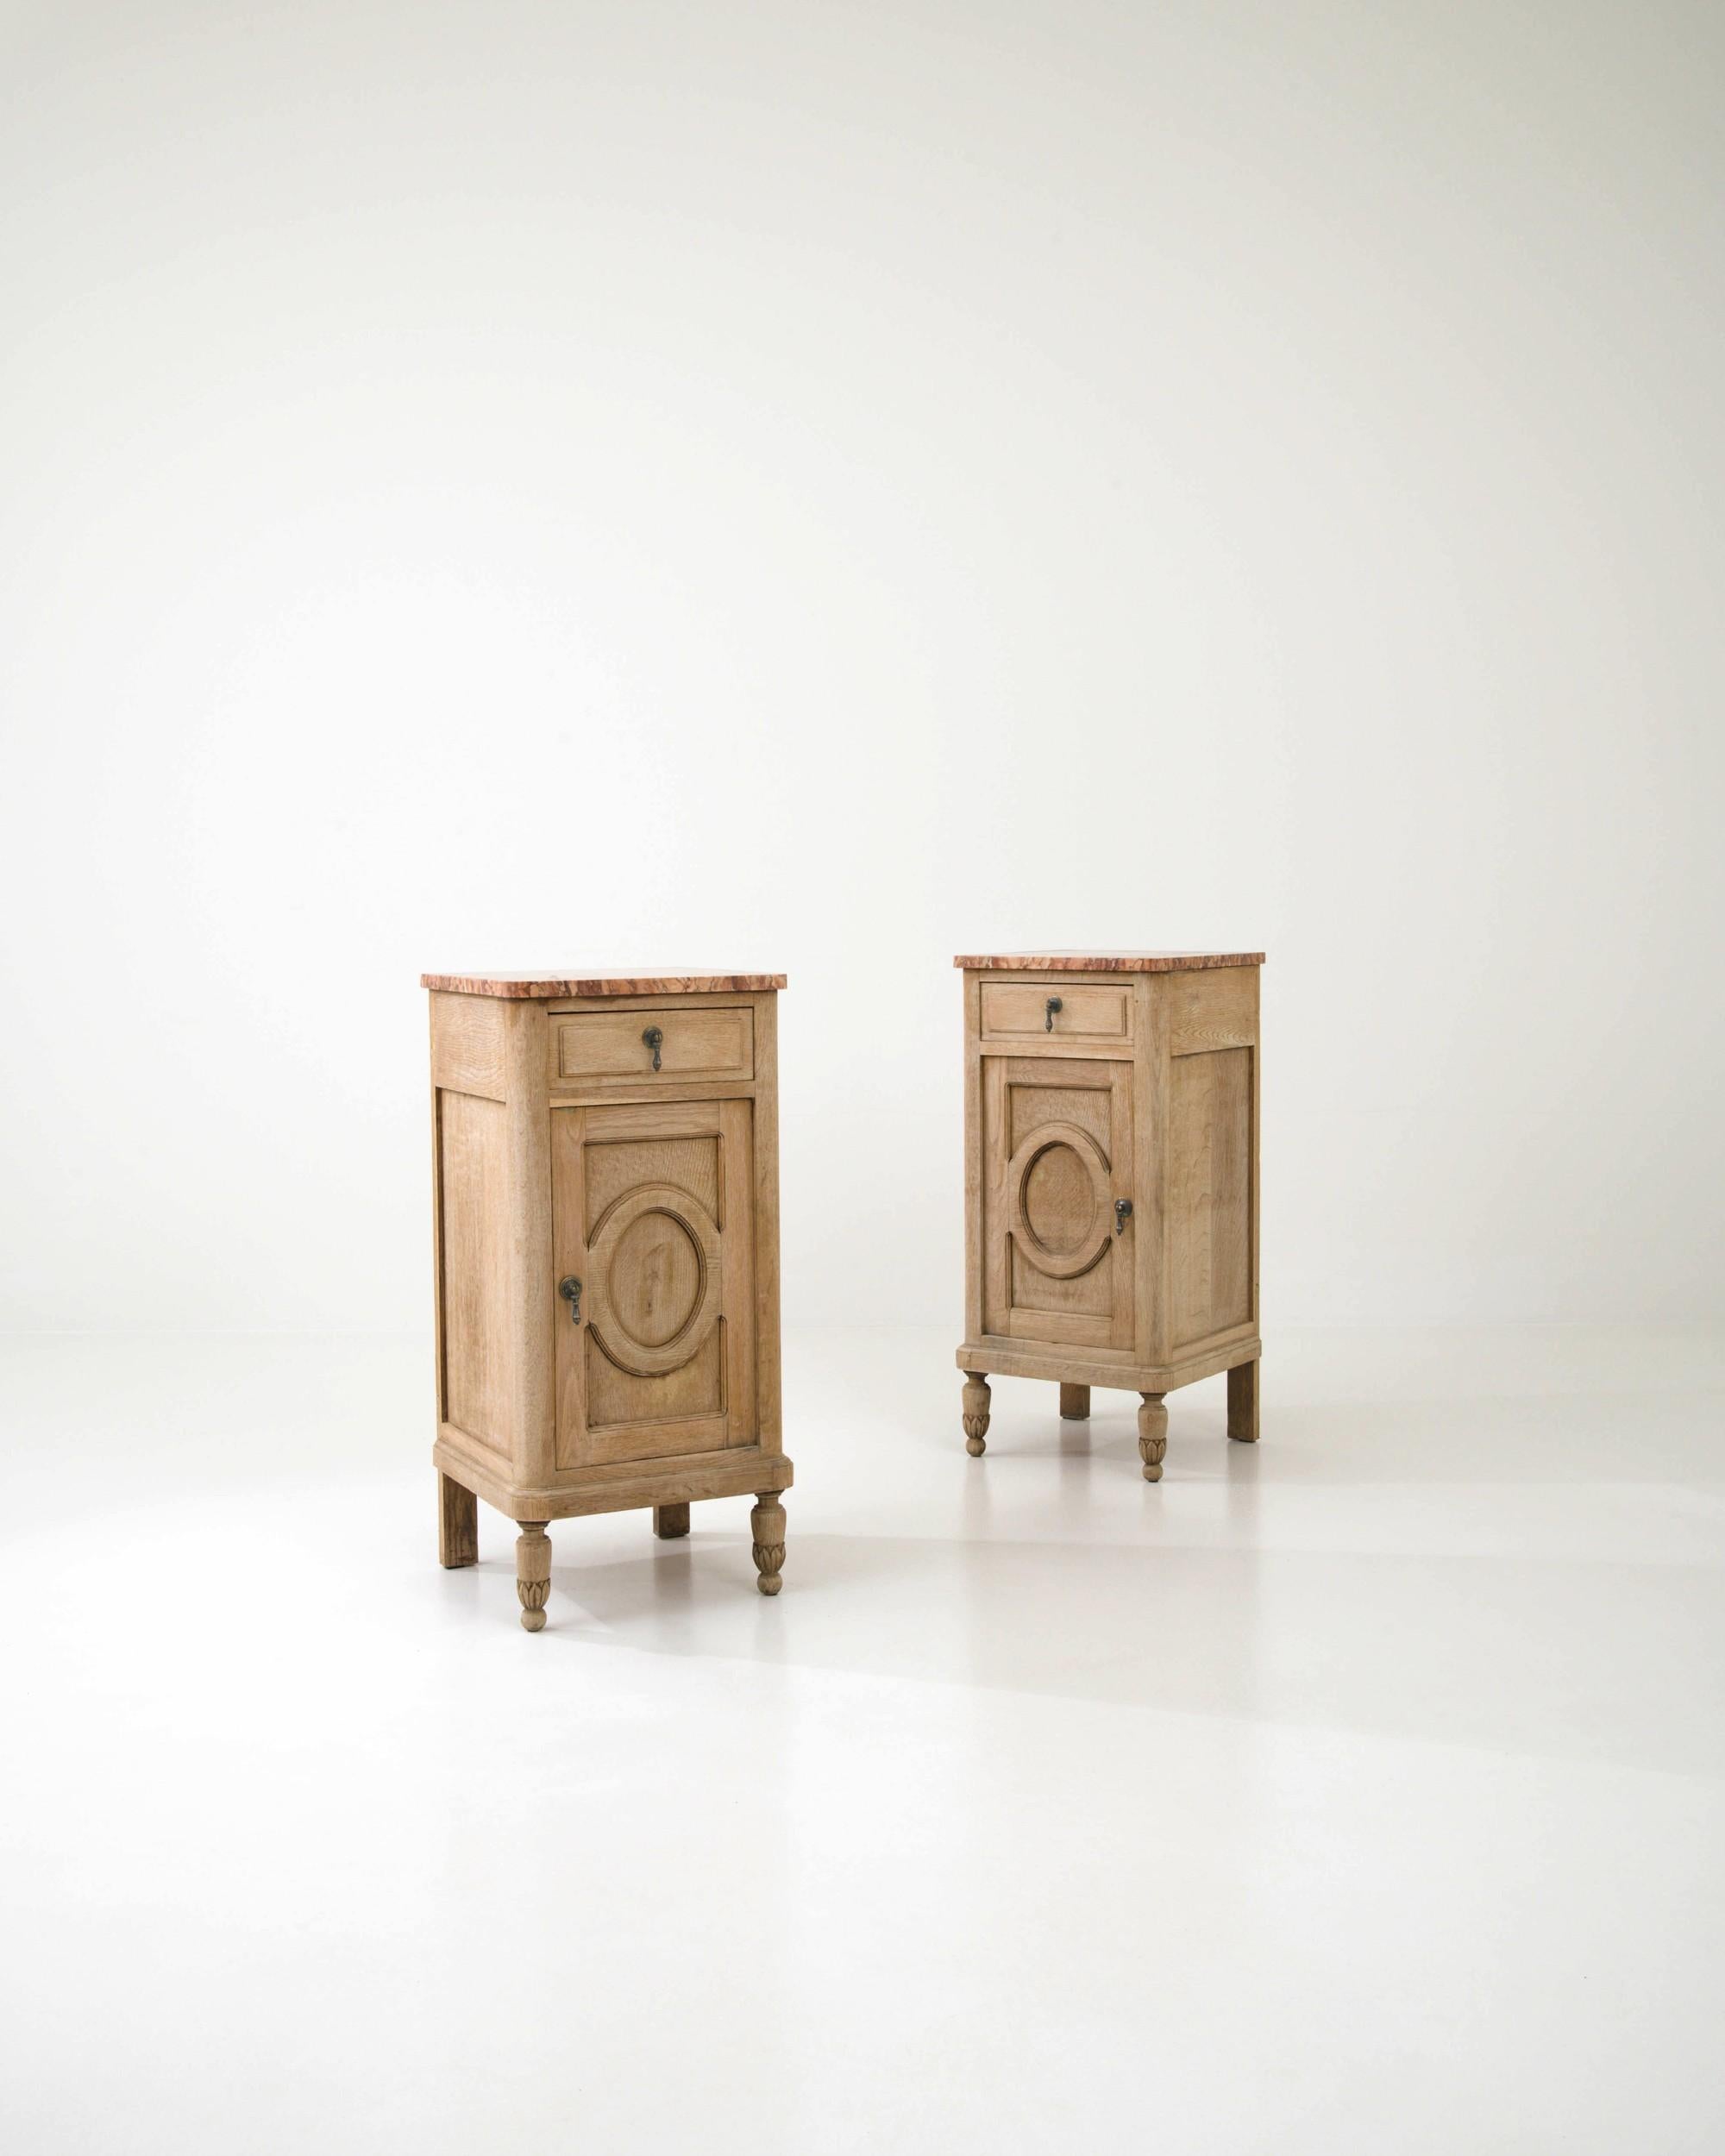 These charming nightstands were hand-crafted in 1900s France. Elevated on masterfully carved turned legs, the bedside tables feature stylish geometric detailing on the doors and exquisite pink marble tops that complement the pale finish of the